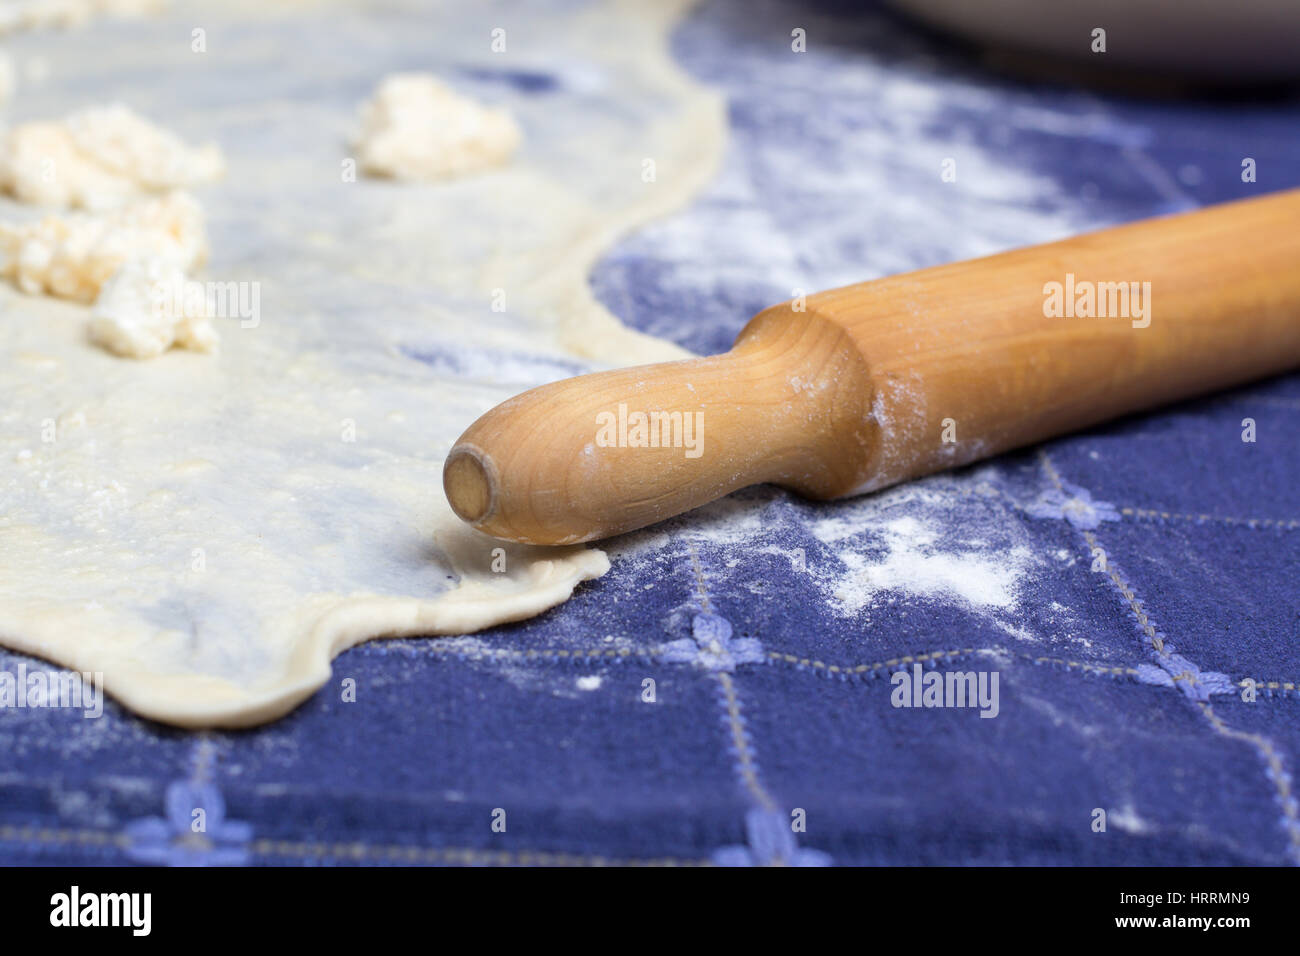 Homemade Phyllo or strudel dough with cheese and rolling pin on a home table cloth ready for cheese burek pie or other kind of traditional pastry. Stock Photo